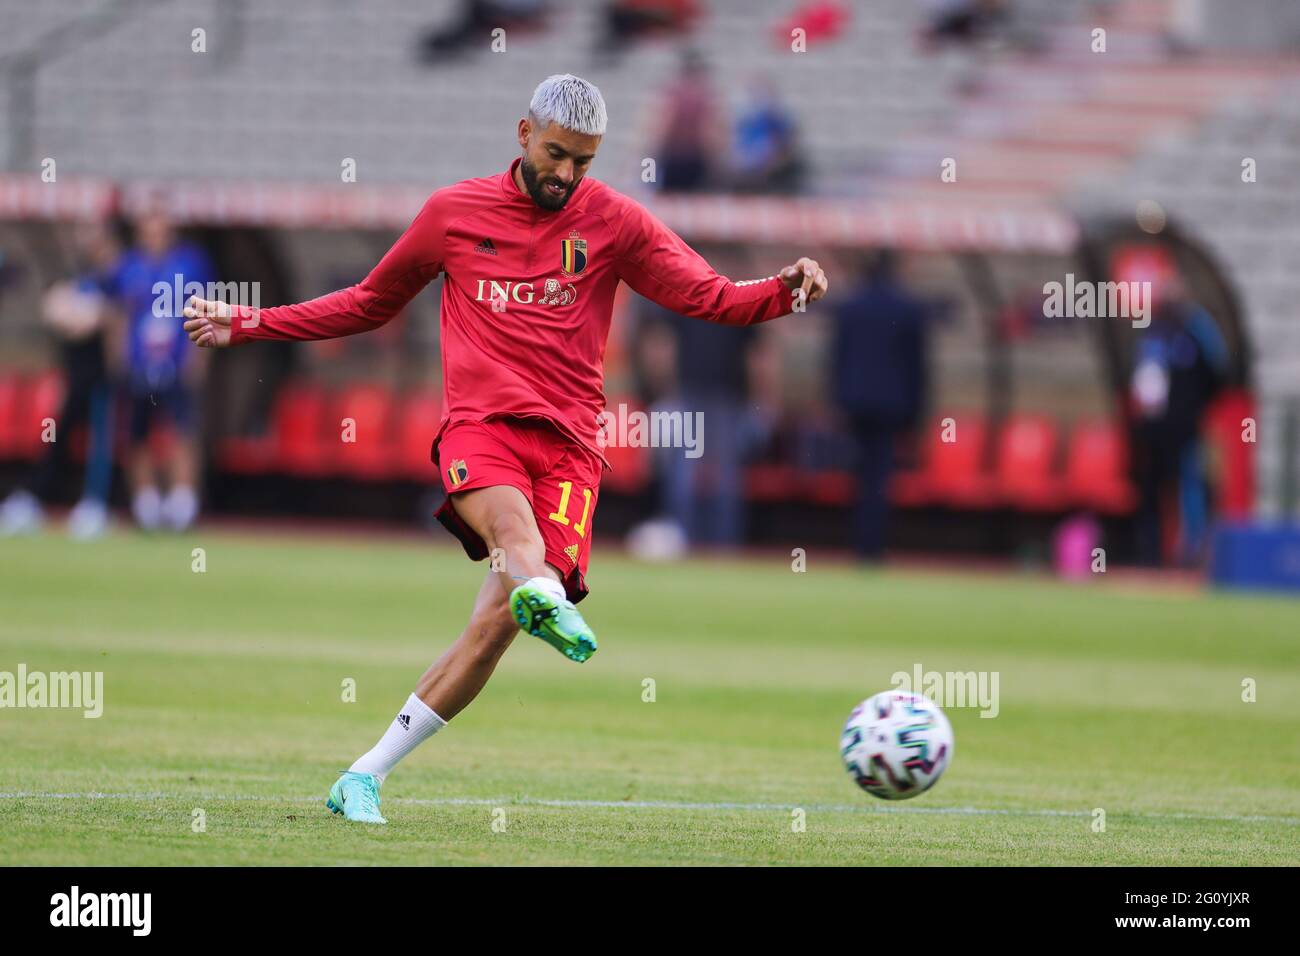 (210604) -- BRUSSELS, June 4, 2021 (Xinhua)-- Yannick Carrasco of Belgium warms up before the International Friendly football match between Belgium and Greece at King Baudouin Stadium in Brussels, Belgium, June 3, 2021. (Xinhua/Zheng Huansong) Stock Photo